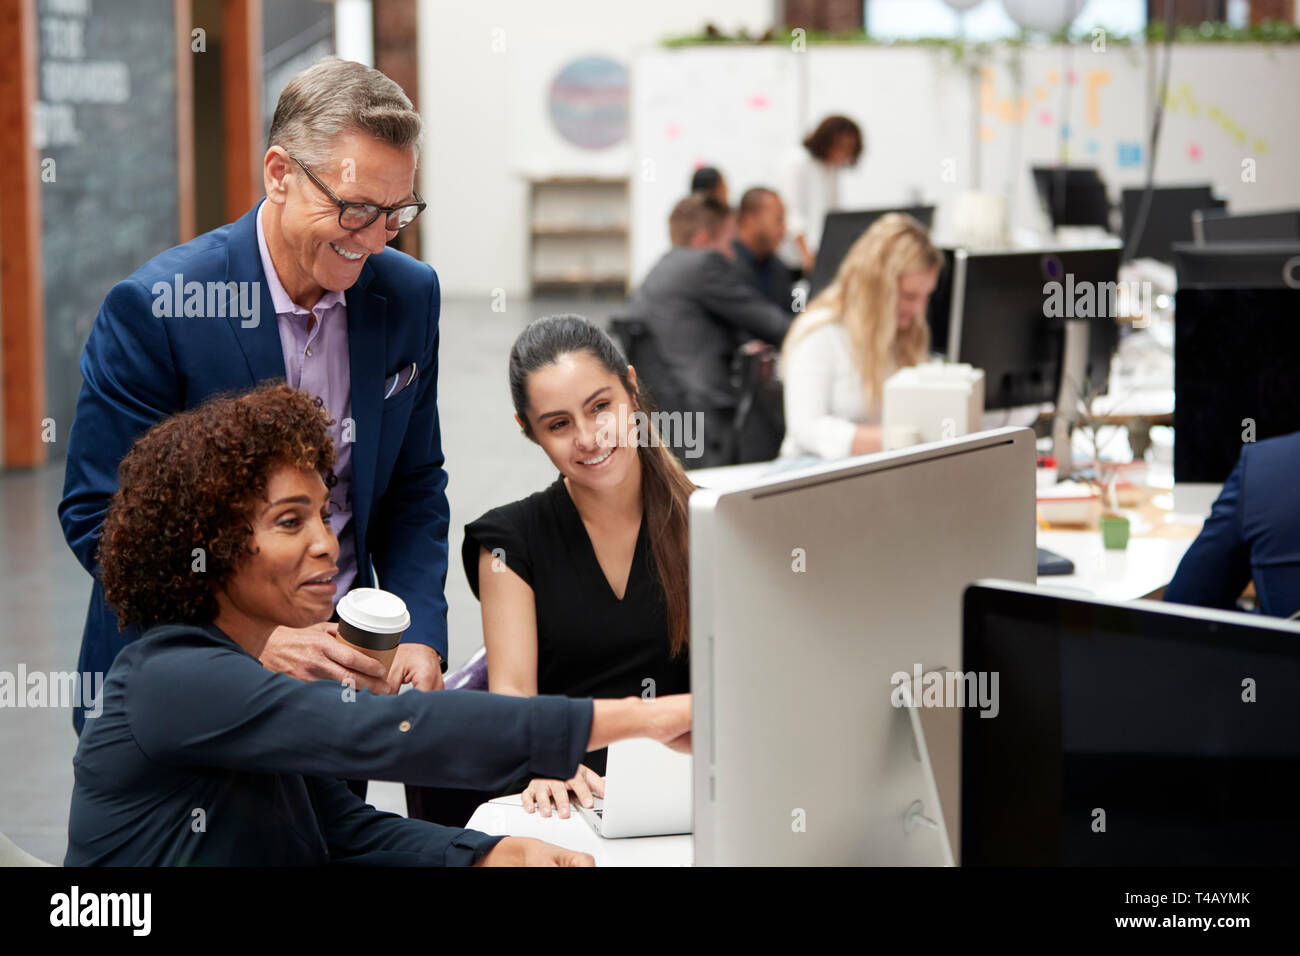 Businessman And Businesswomen Working At Computer On Desk In Open Plan Office Stock Photo